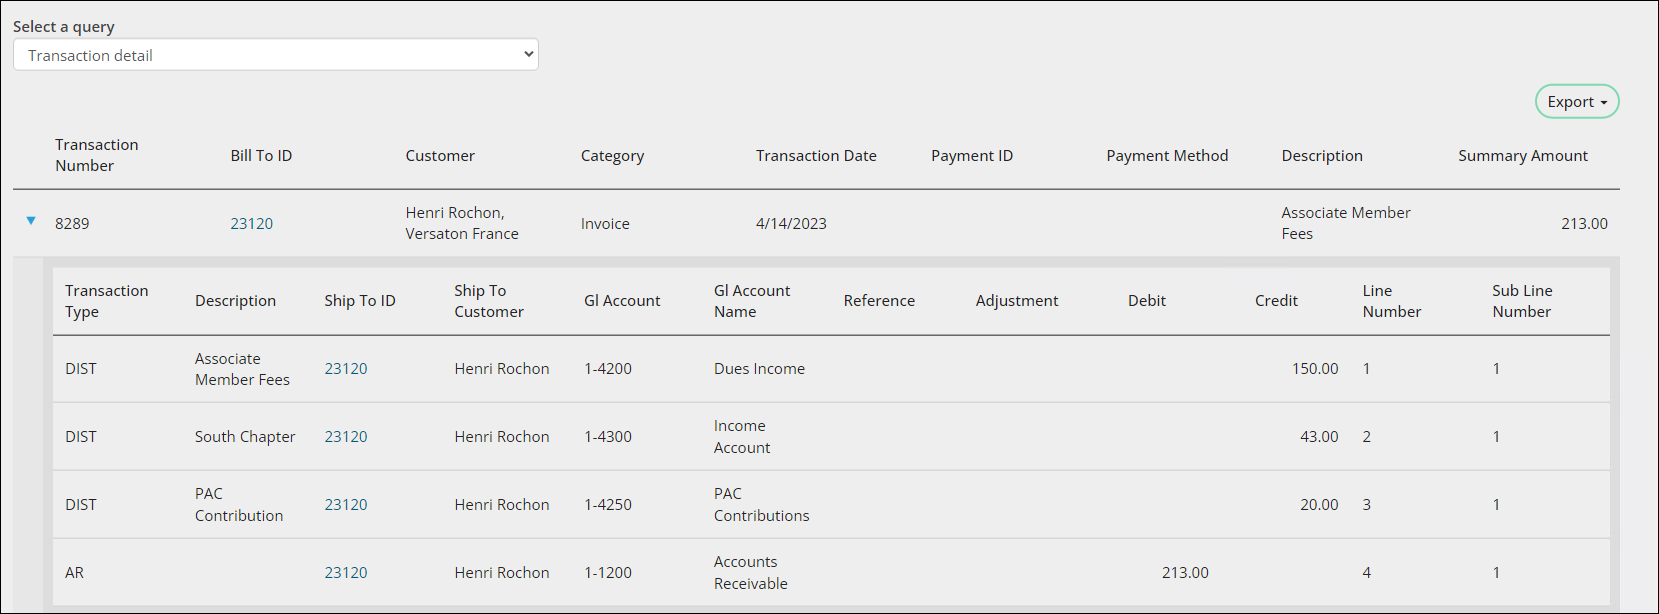 Viewing the transaction details using the transaction detail query